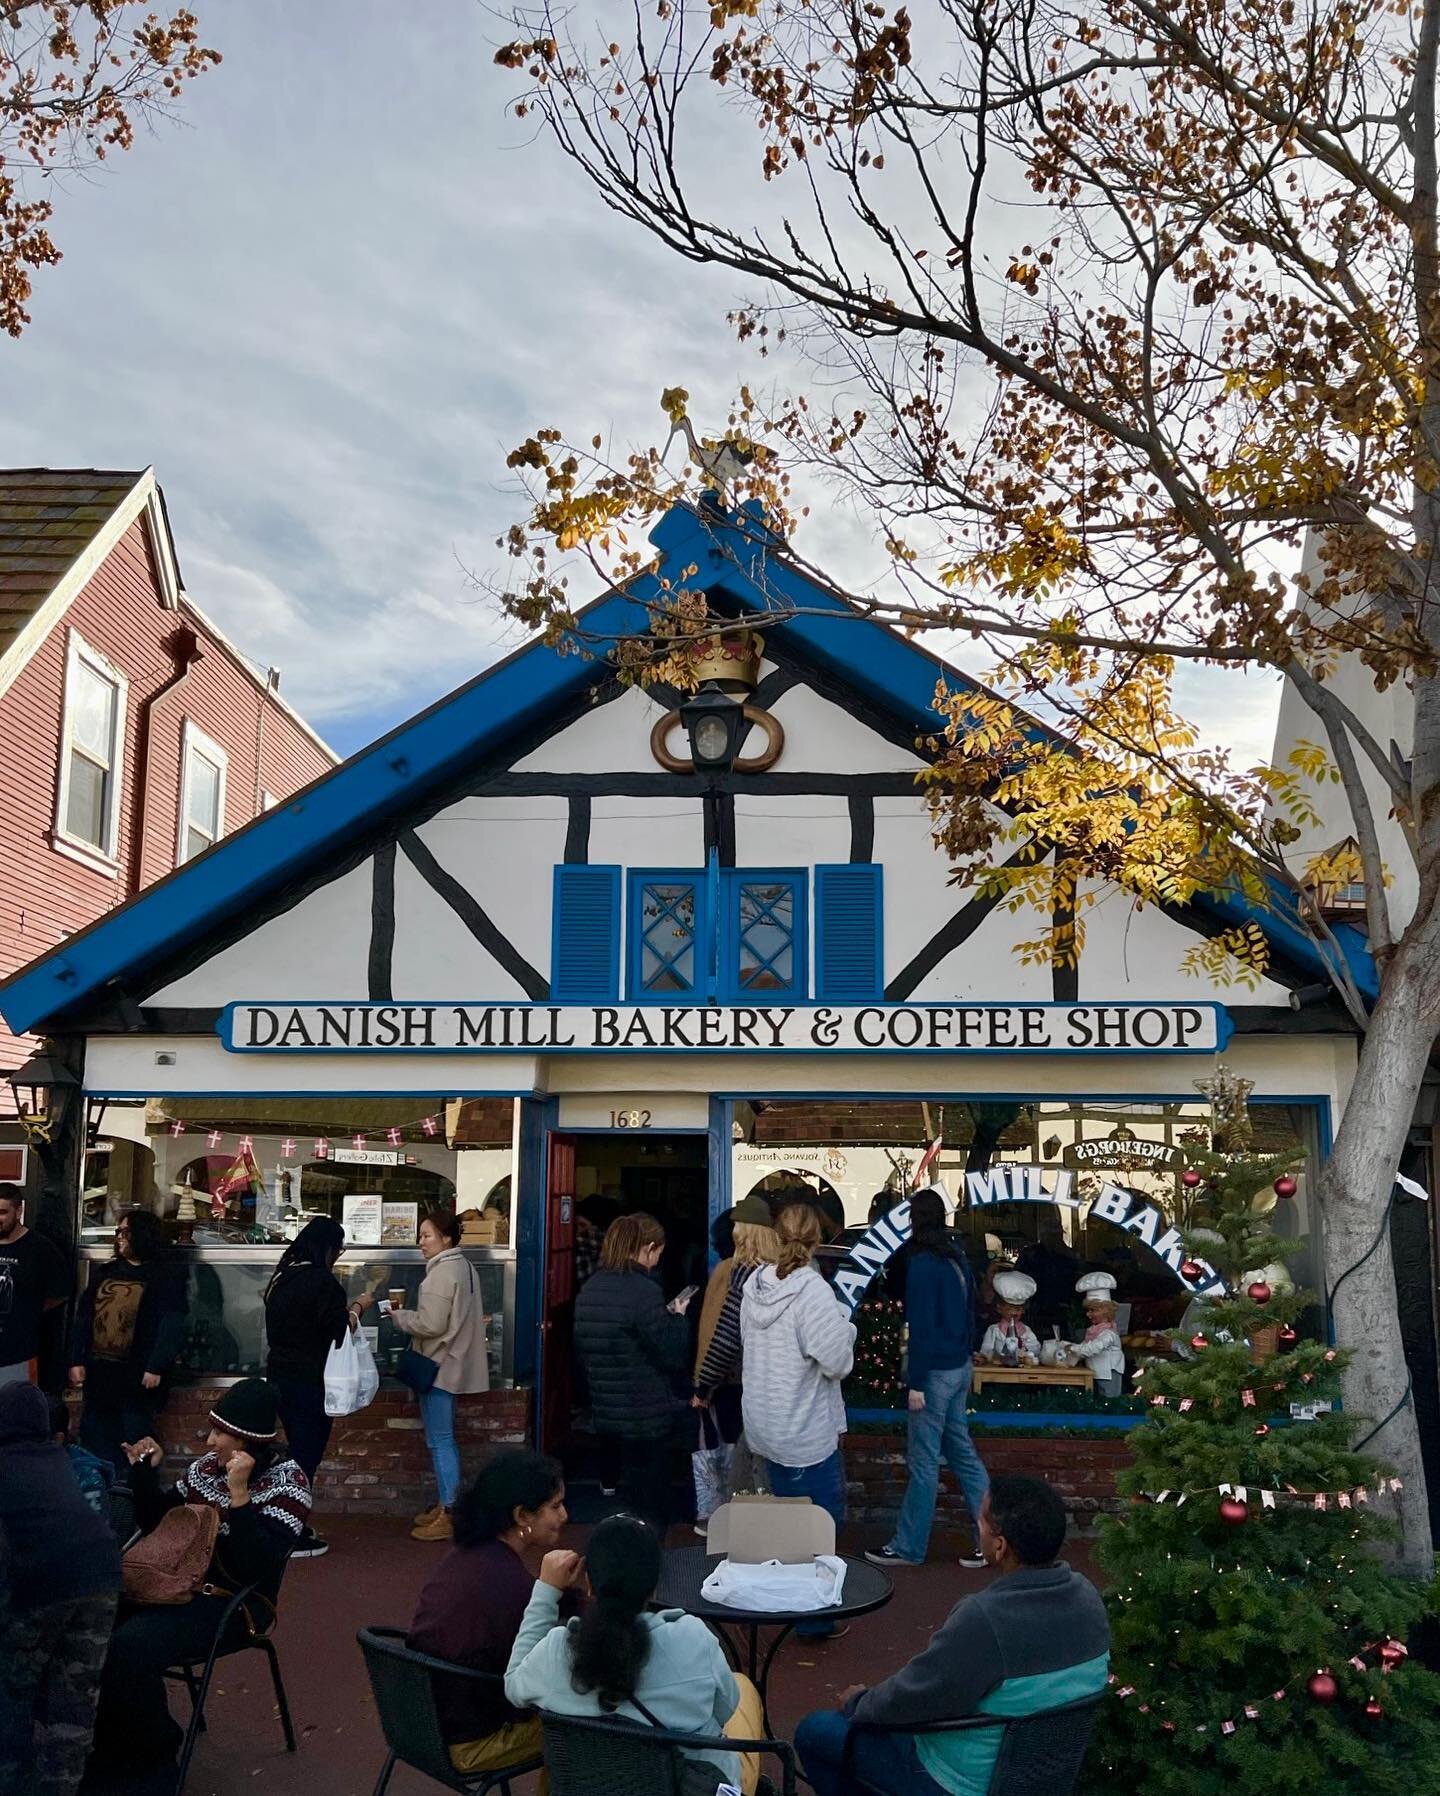 Good morning, #Solvang! This busy, bustling scene at local Danish Mill Bakery &amp; Coffee Shop shows you just how delicious their offerings are--Danish specialties perfected here in Solvang for over 60 years! 
Pro tip for those visiting the Ranch fr